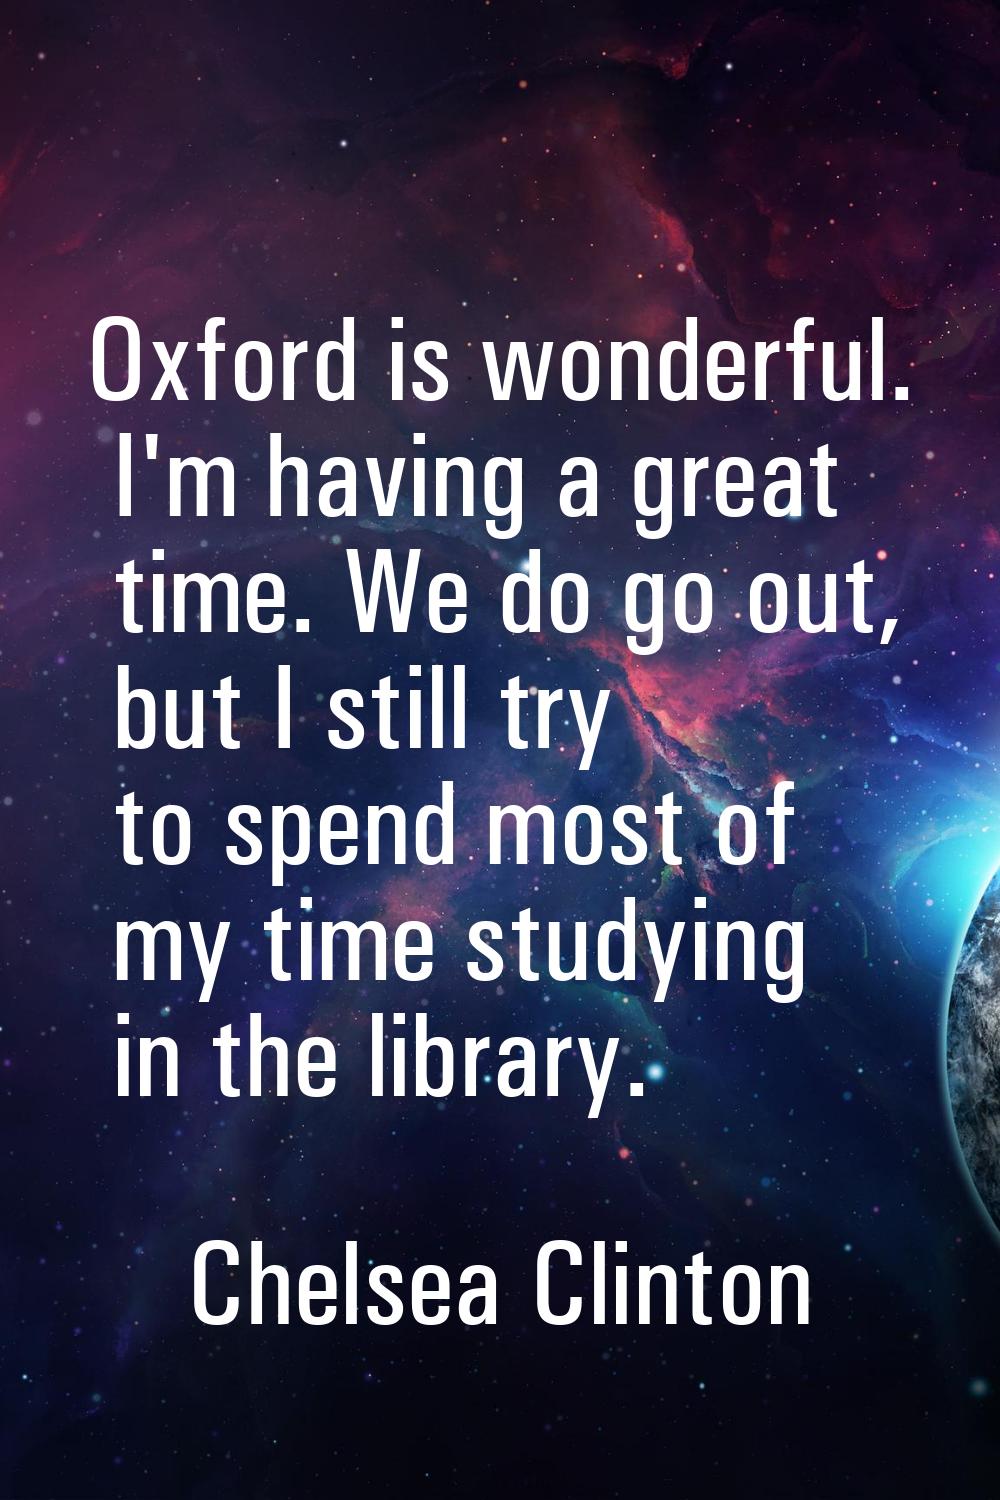 Oxford is wonderful. I'm having a great time. We do go out, but I still try to spend most of my tim